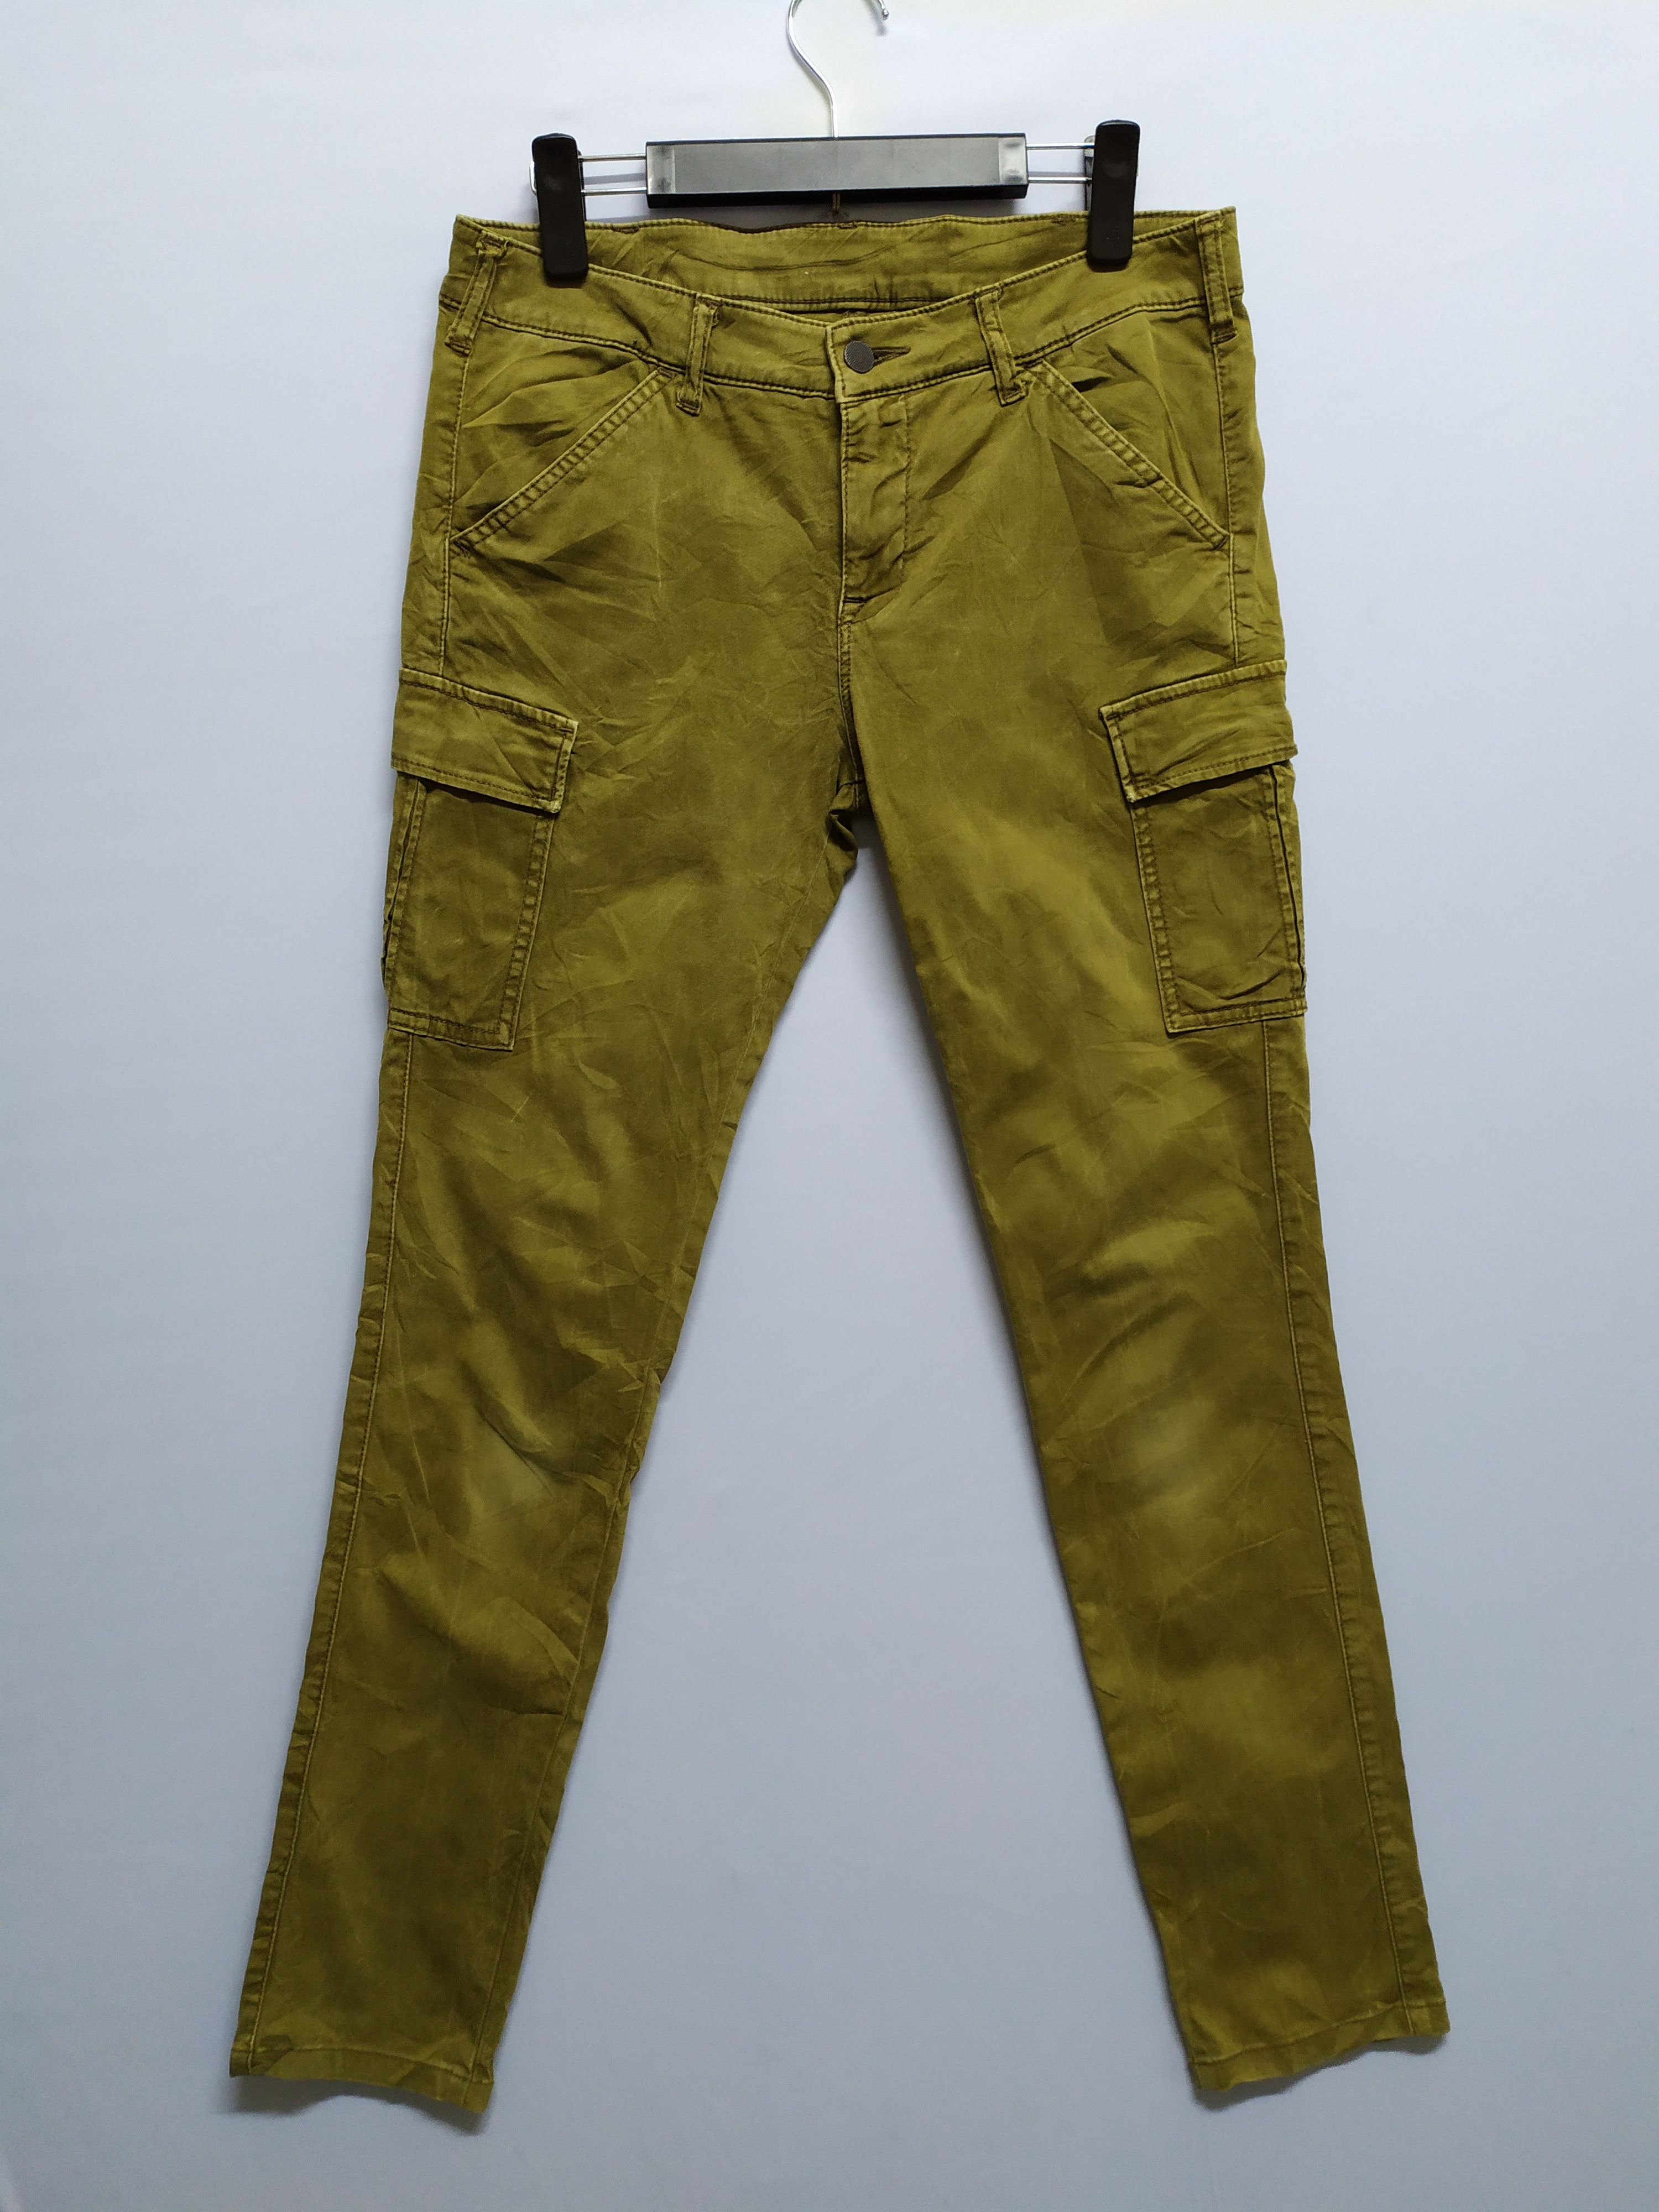 Uniqlo Uniqlo Streetwear Cargo Pants Multipocket tactical Size US 29 - 1 Preview